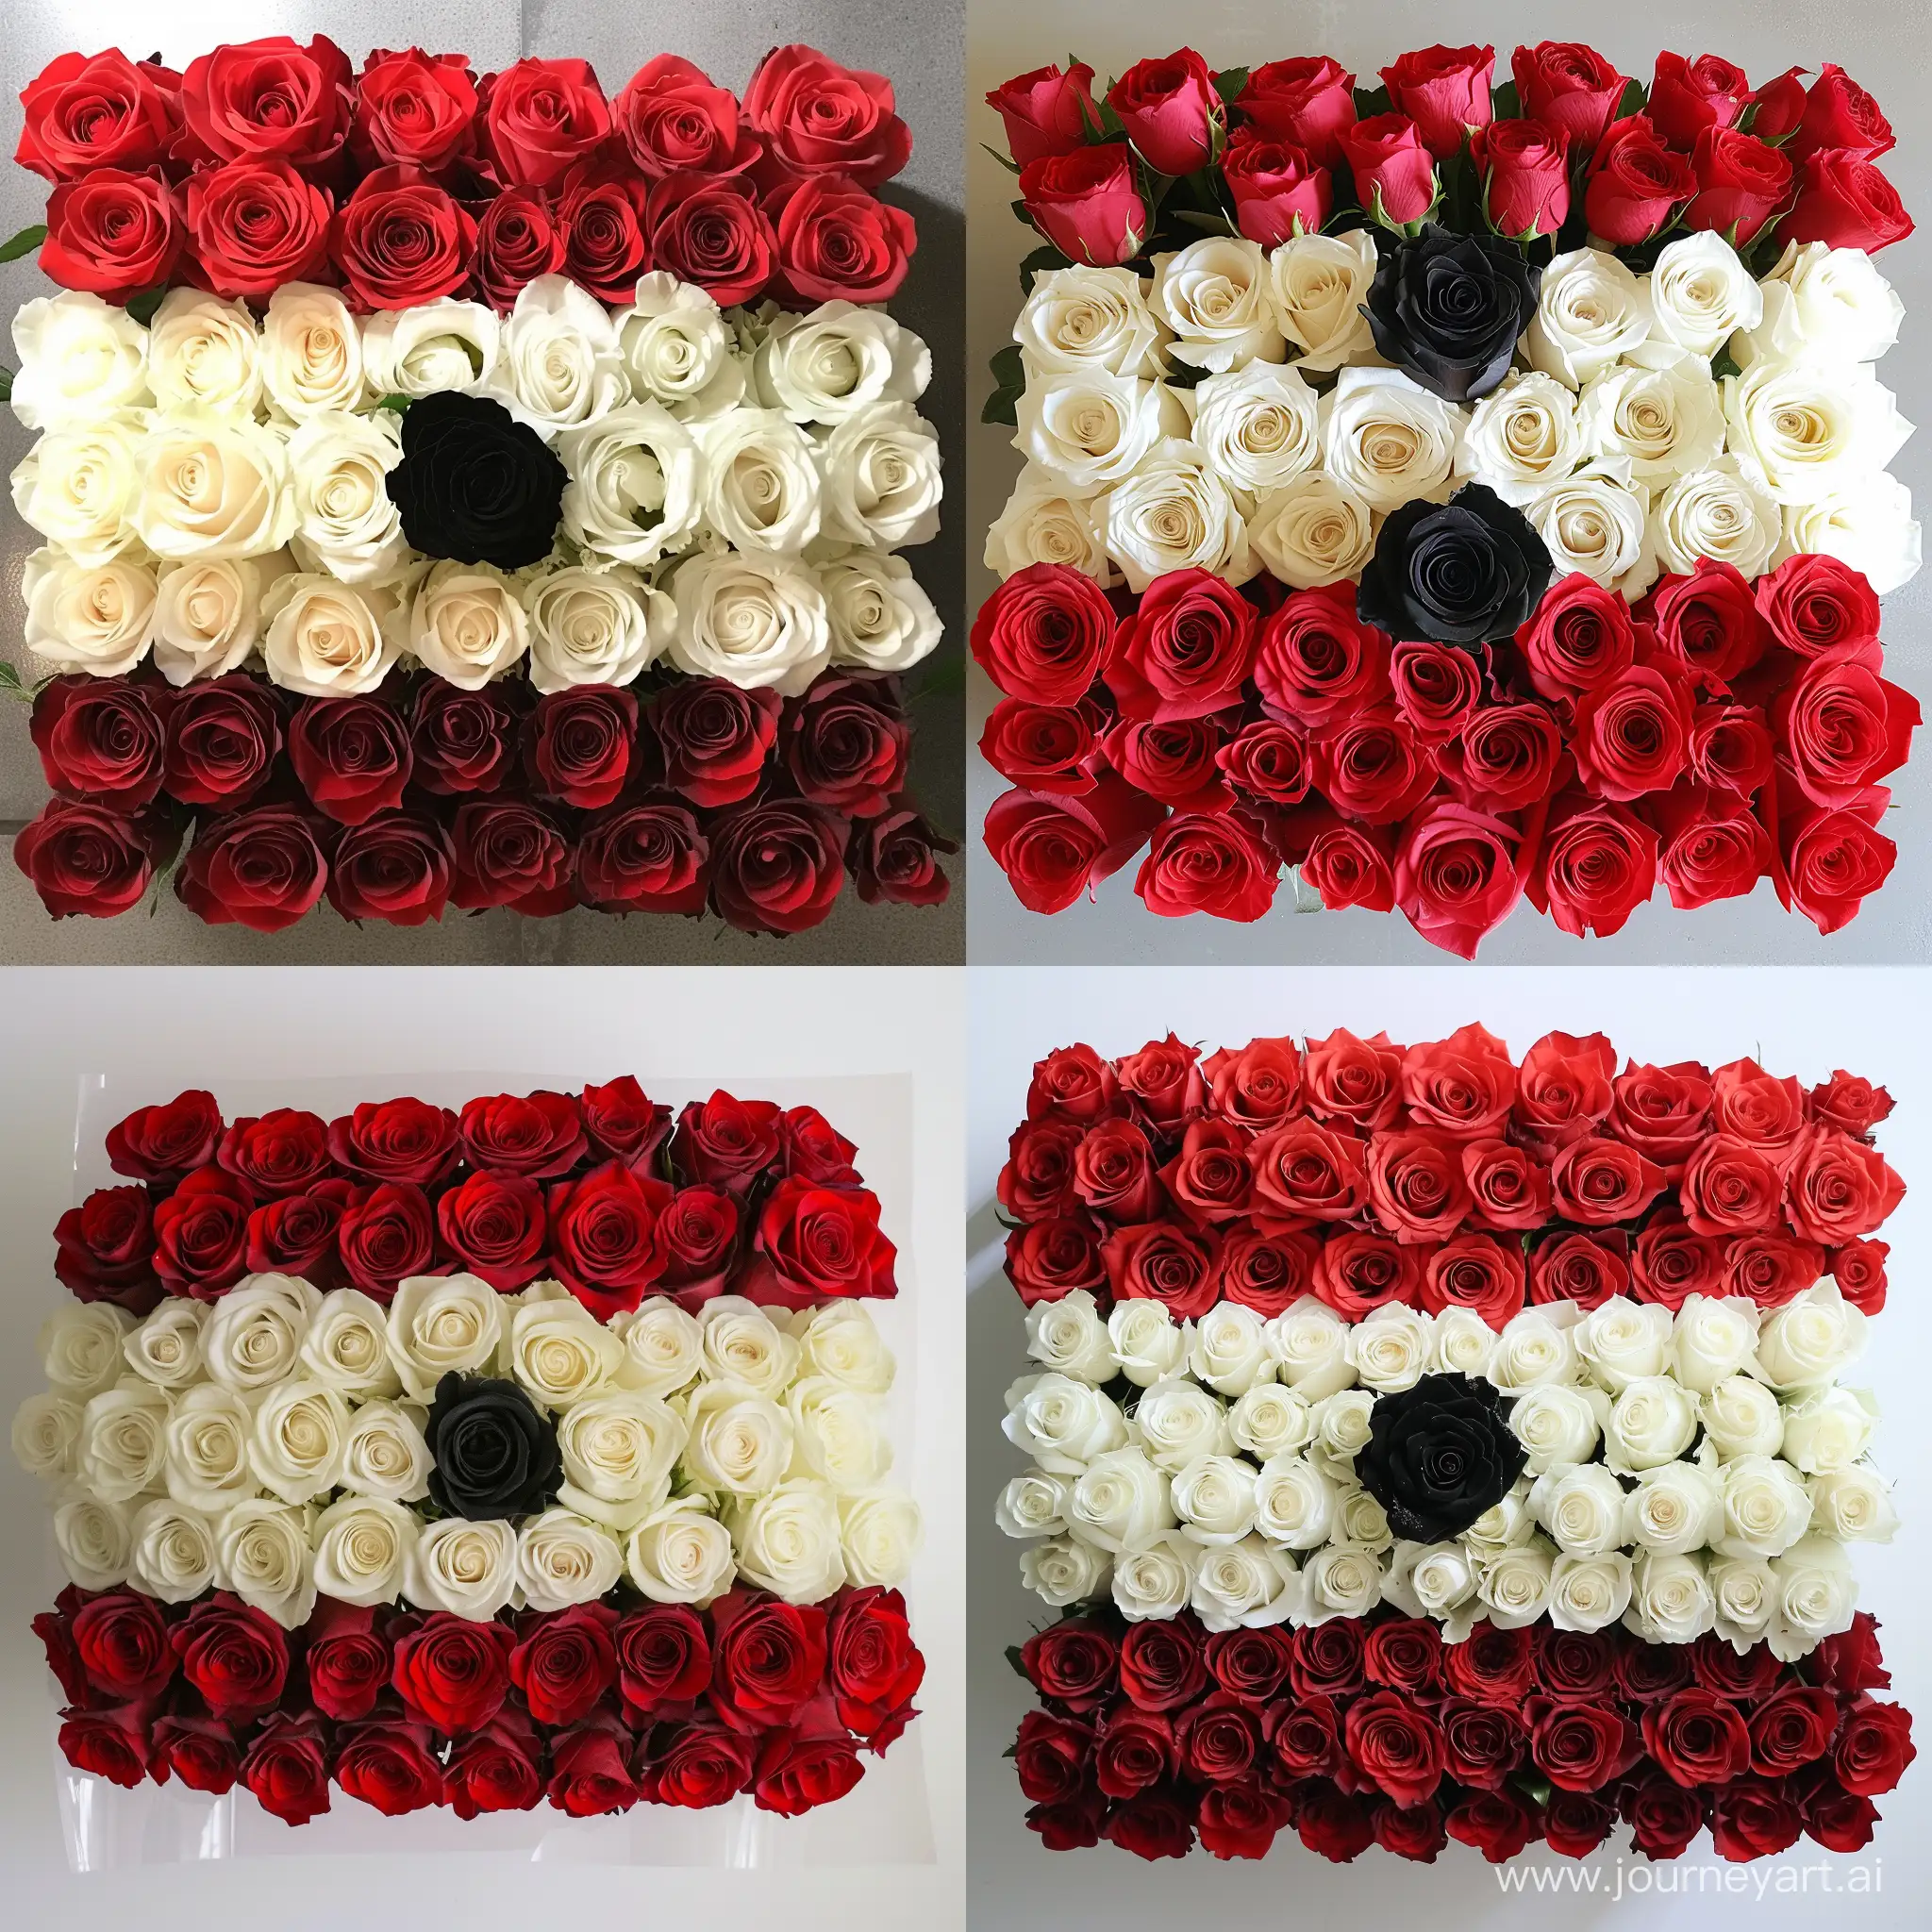 bouquet of flowers arranged as 2 x 3 x 2 with red roses on top, white roses in middle row (with a black rose in the middle), and red roses on bottom